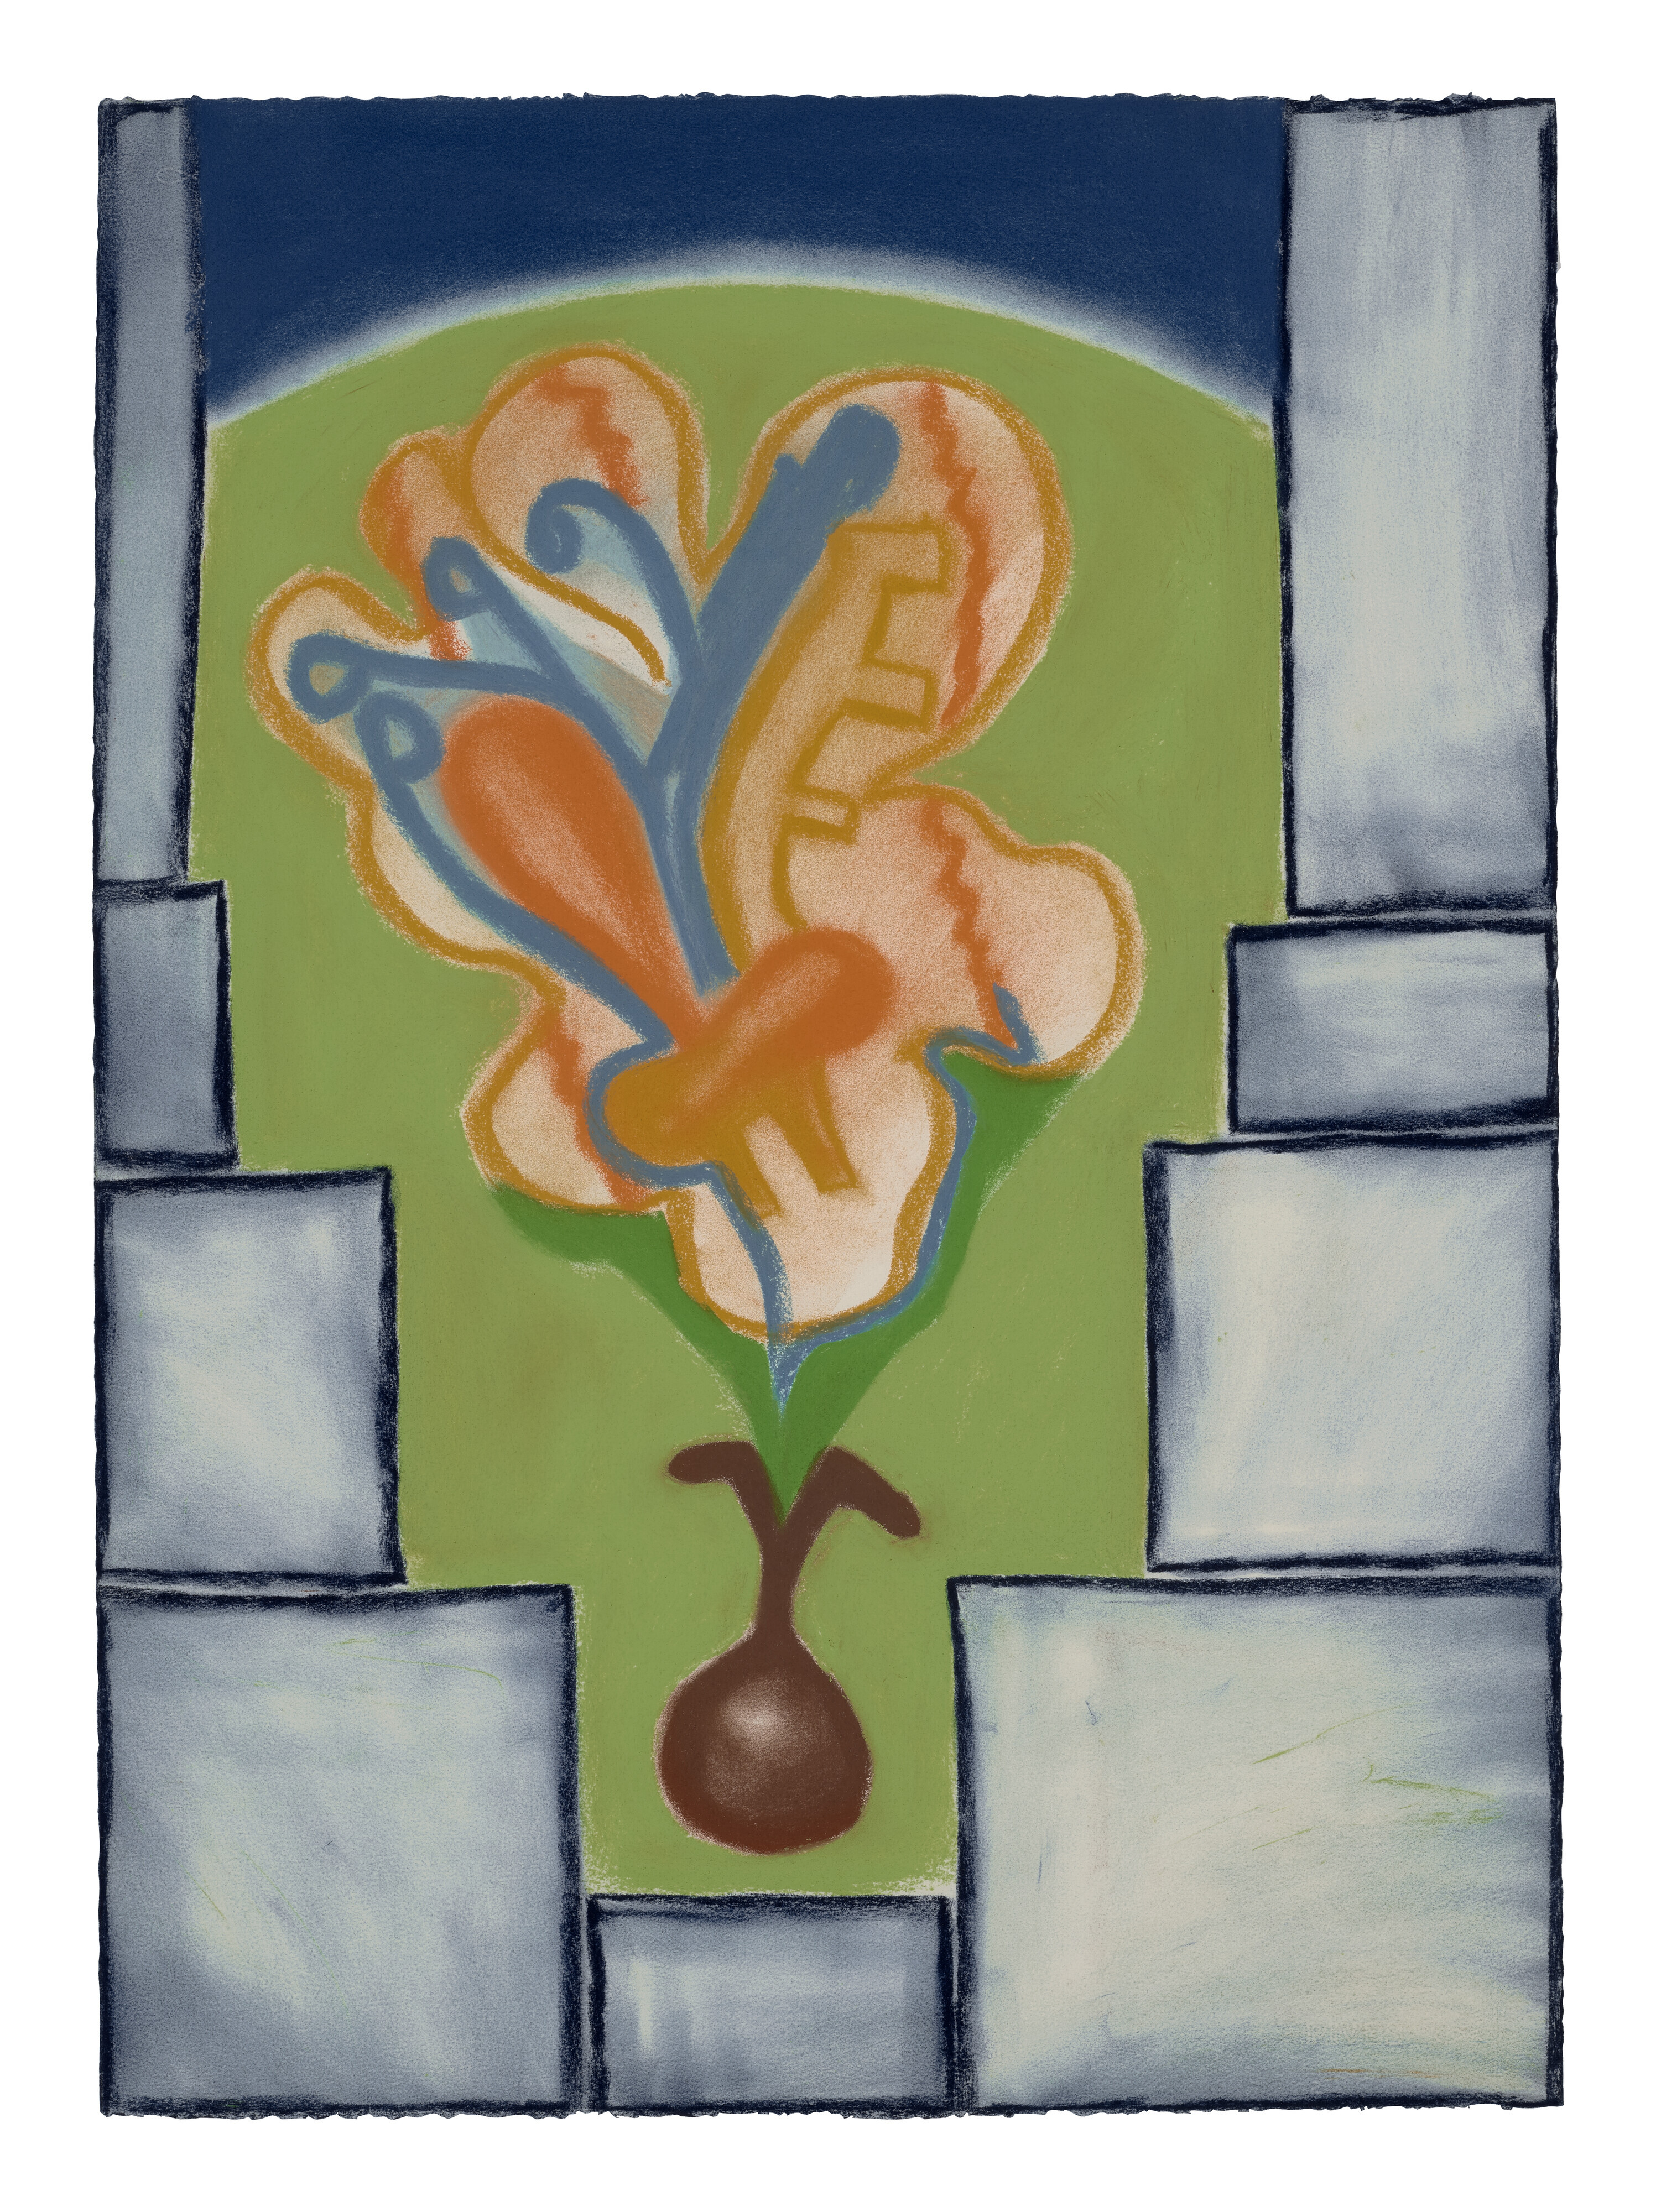 Francesco Clemente, ‘Babylon at Night,’ 1988 pastel on paper, 26 by 19in. (66 by 48.2cm), on view in Francesco Clemente: Works from the Collection of Thomas and Doris Ammann. Image courtesy of Christie’s Images Ltd. 2022